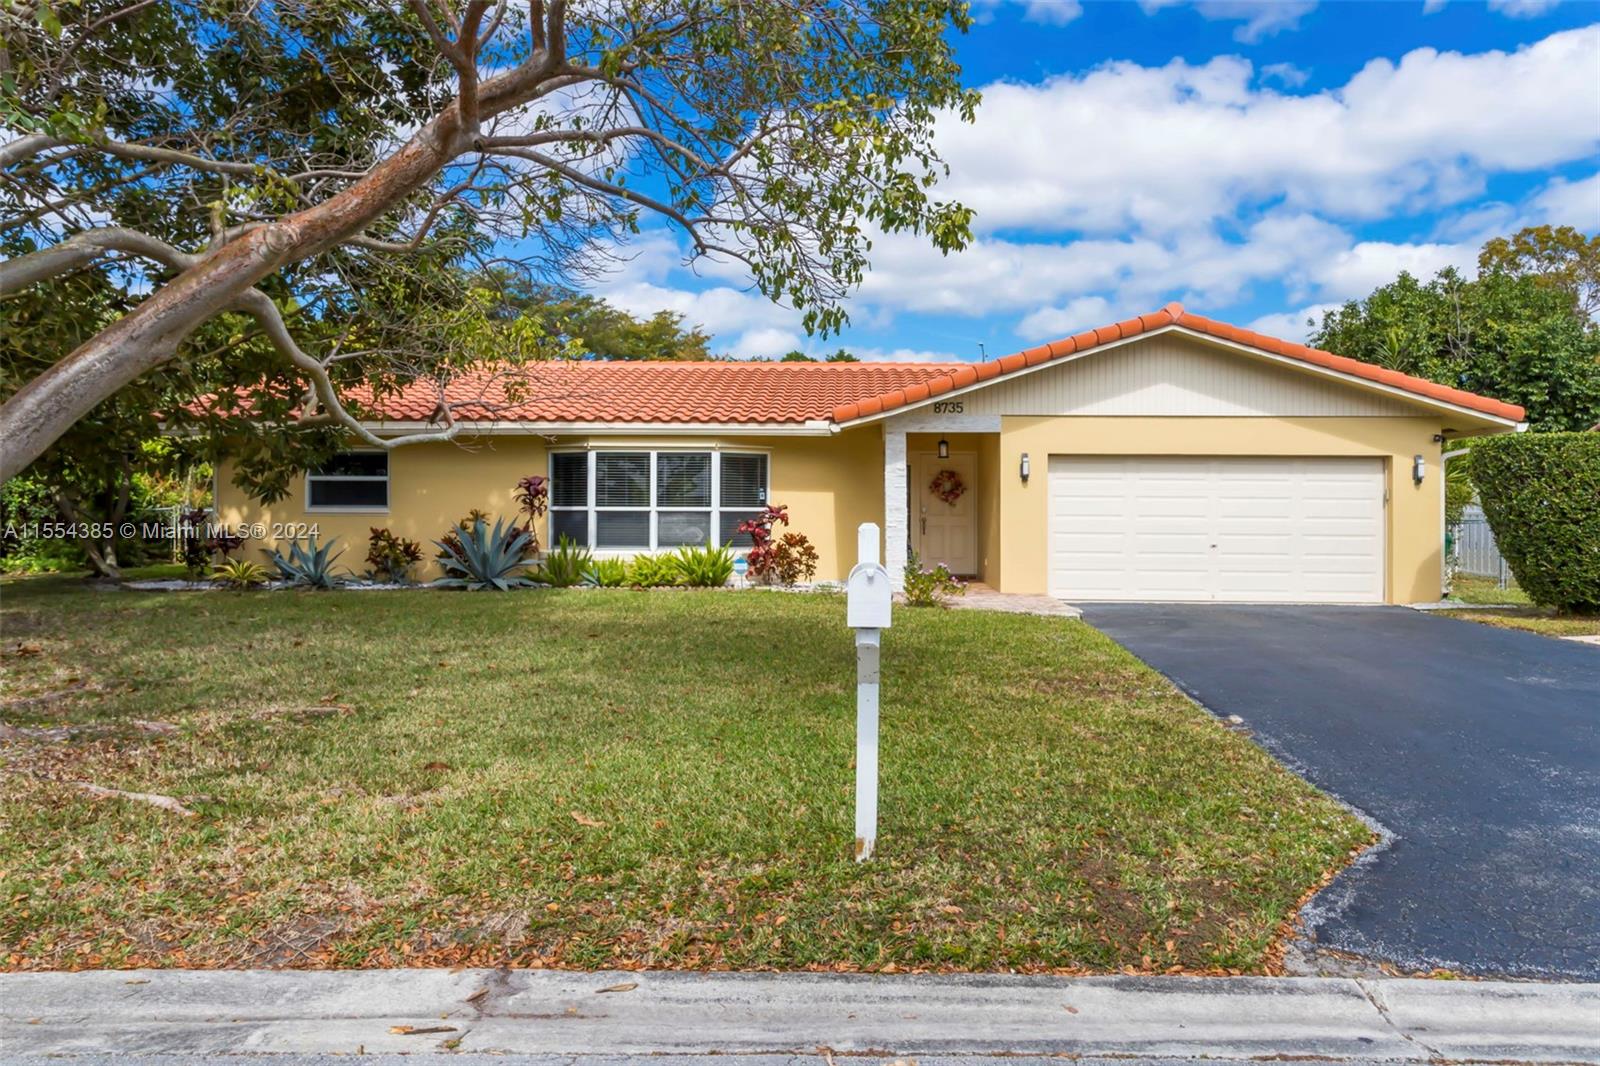 House for Sale in Coral Springs, FL